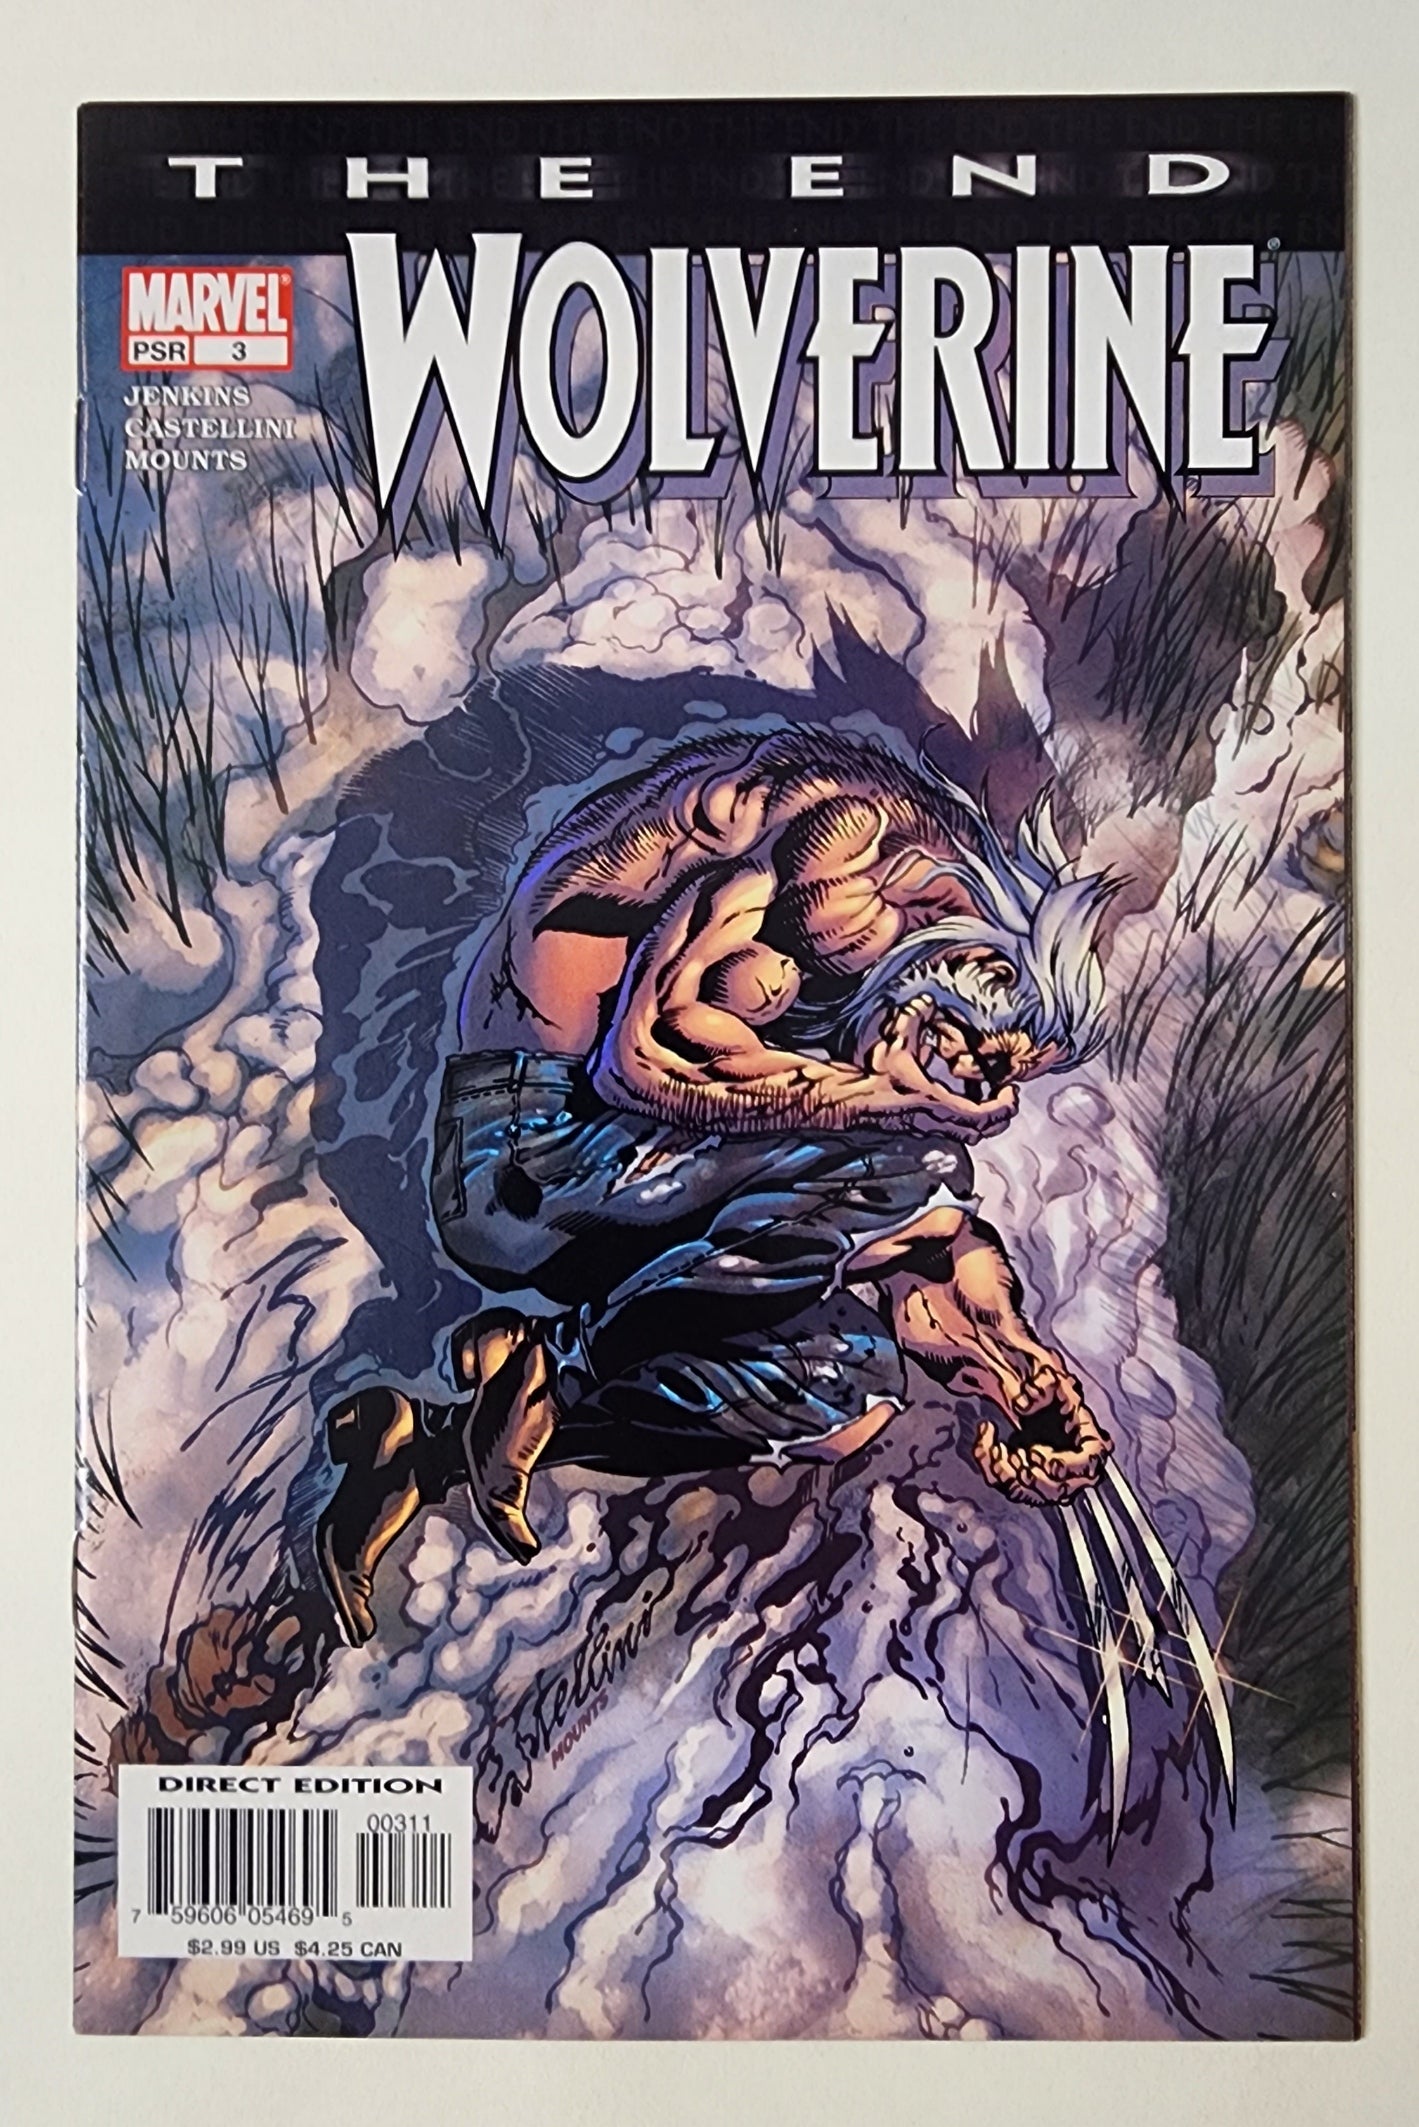 Wolverine: The End #3 (VF)